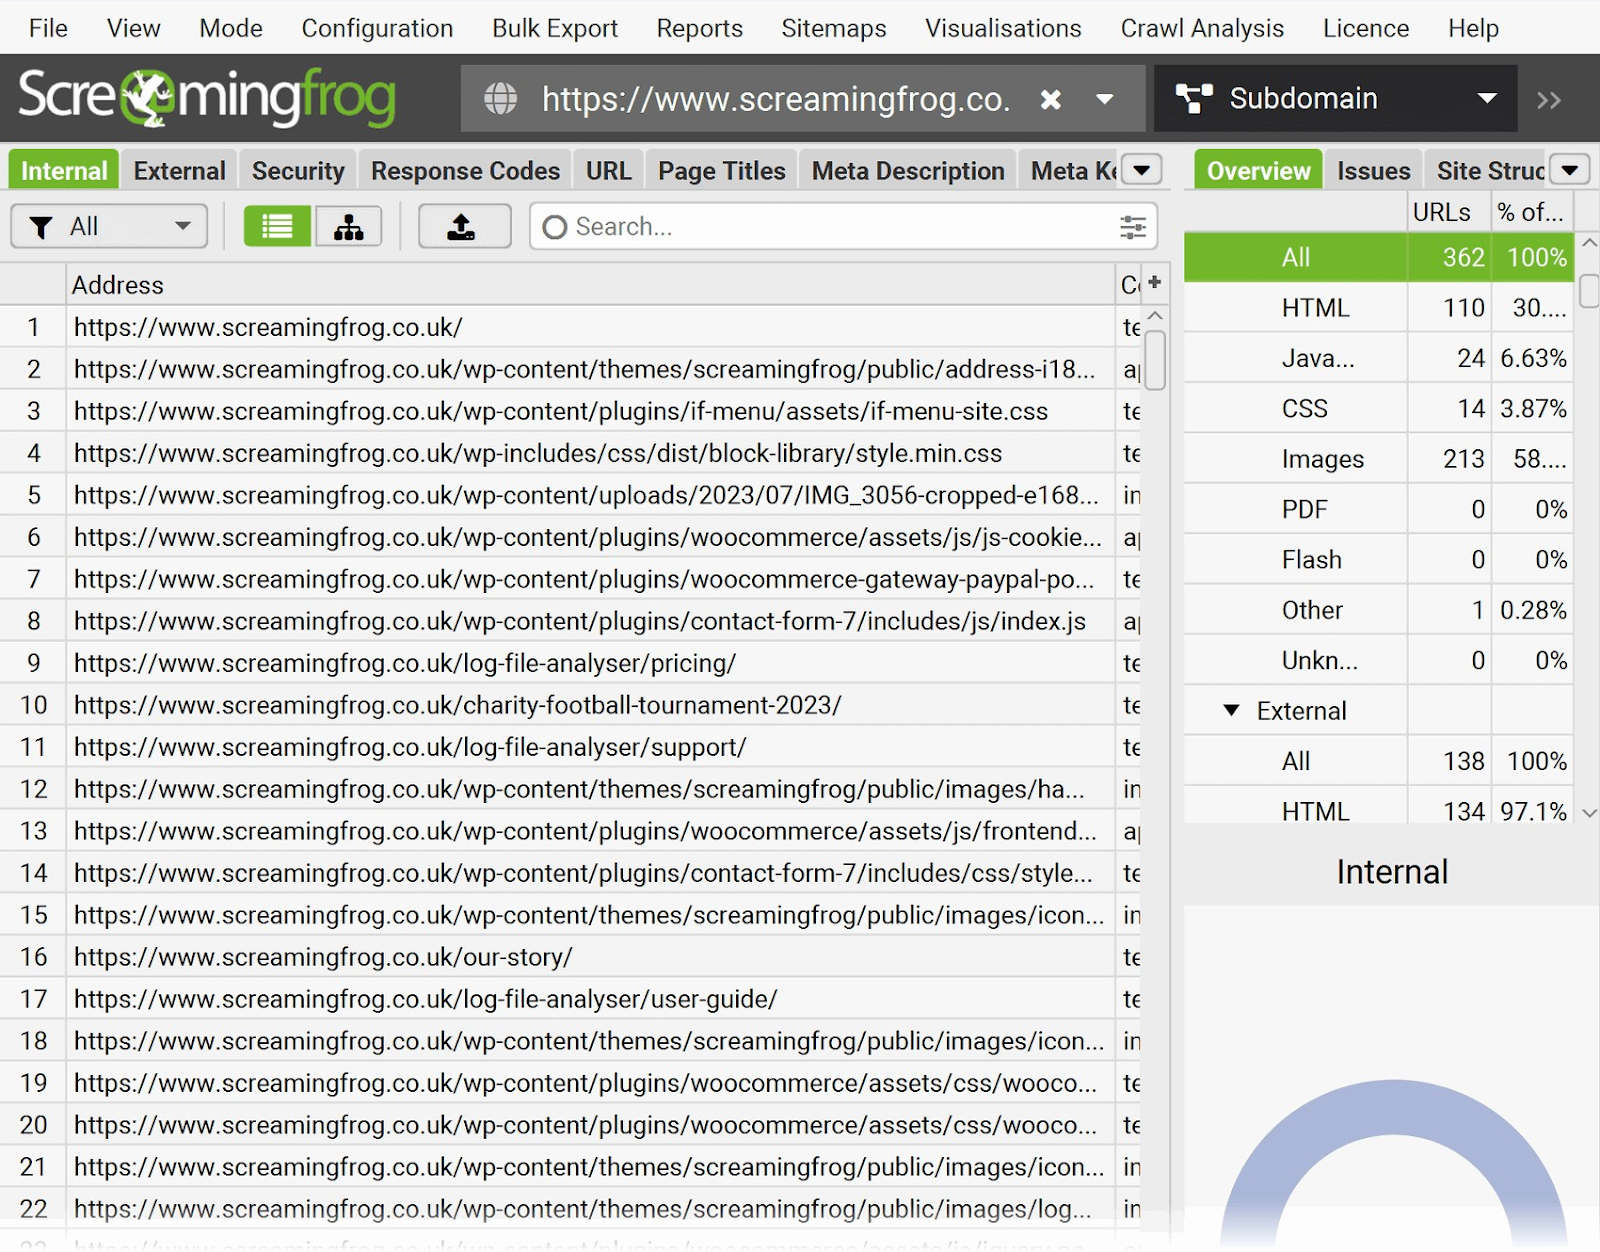 Screaming Frog’s SEO Spider dashboard